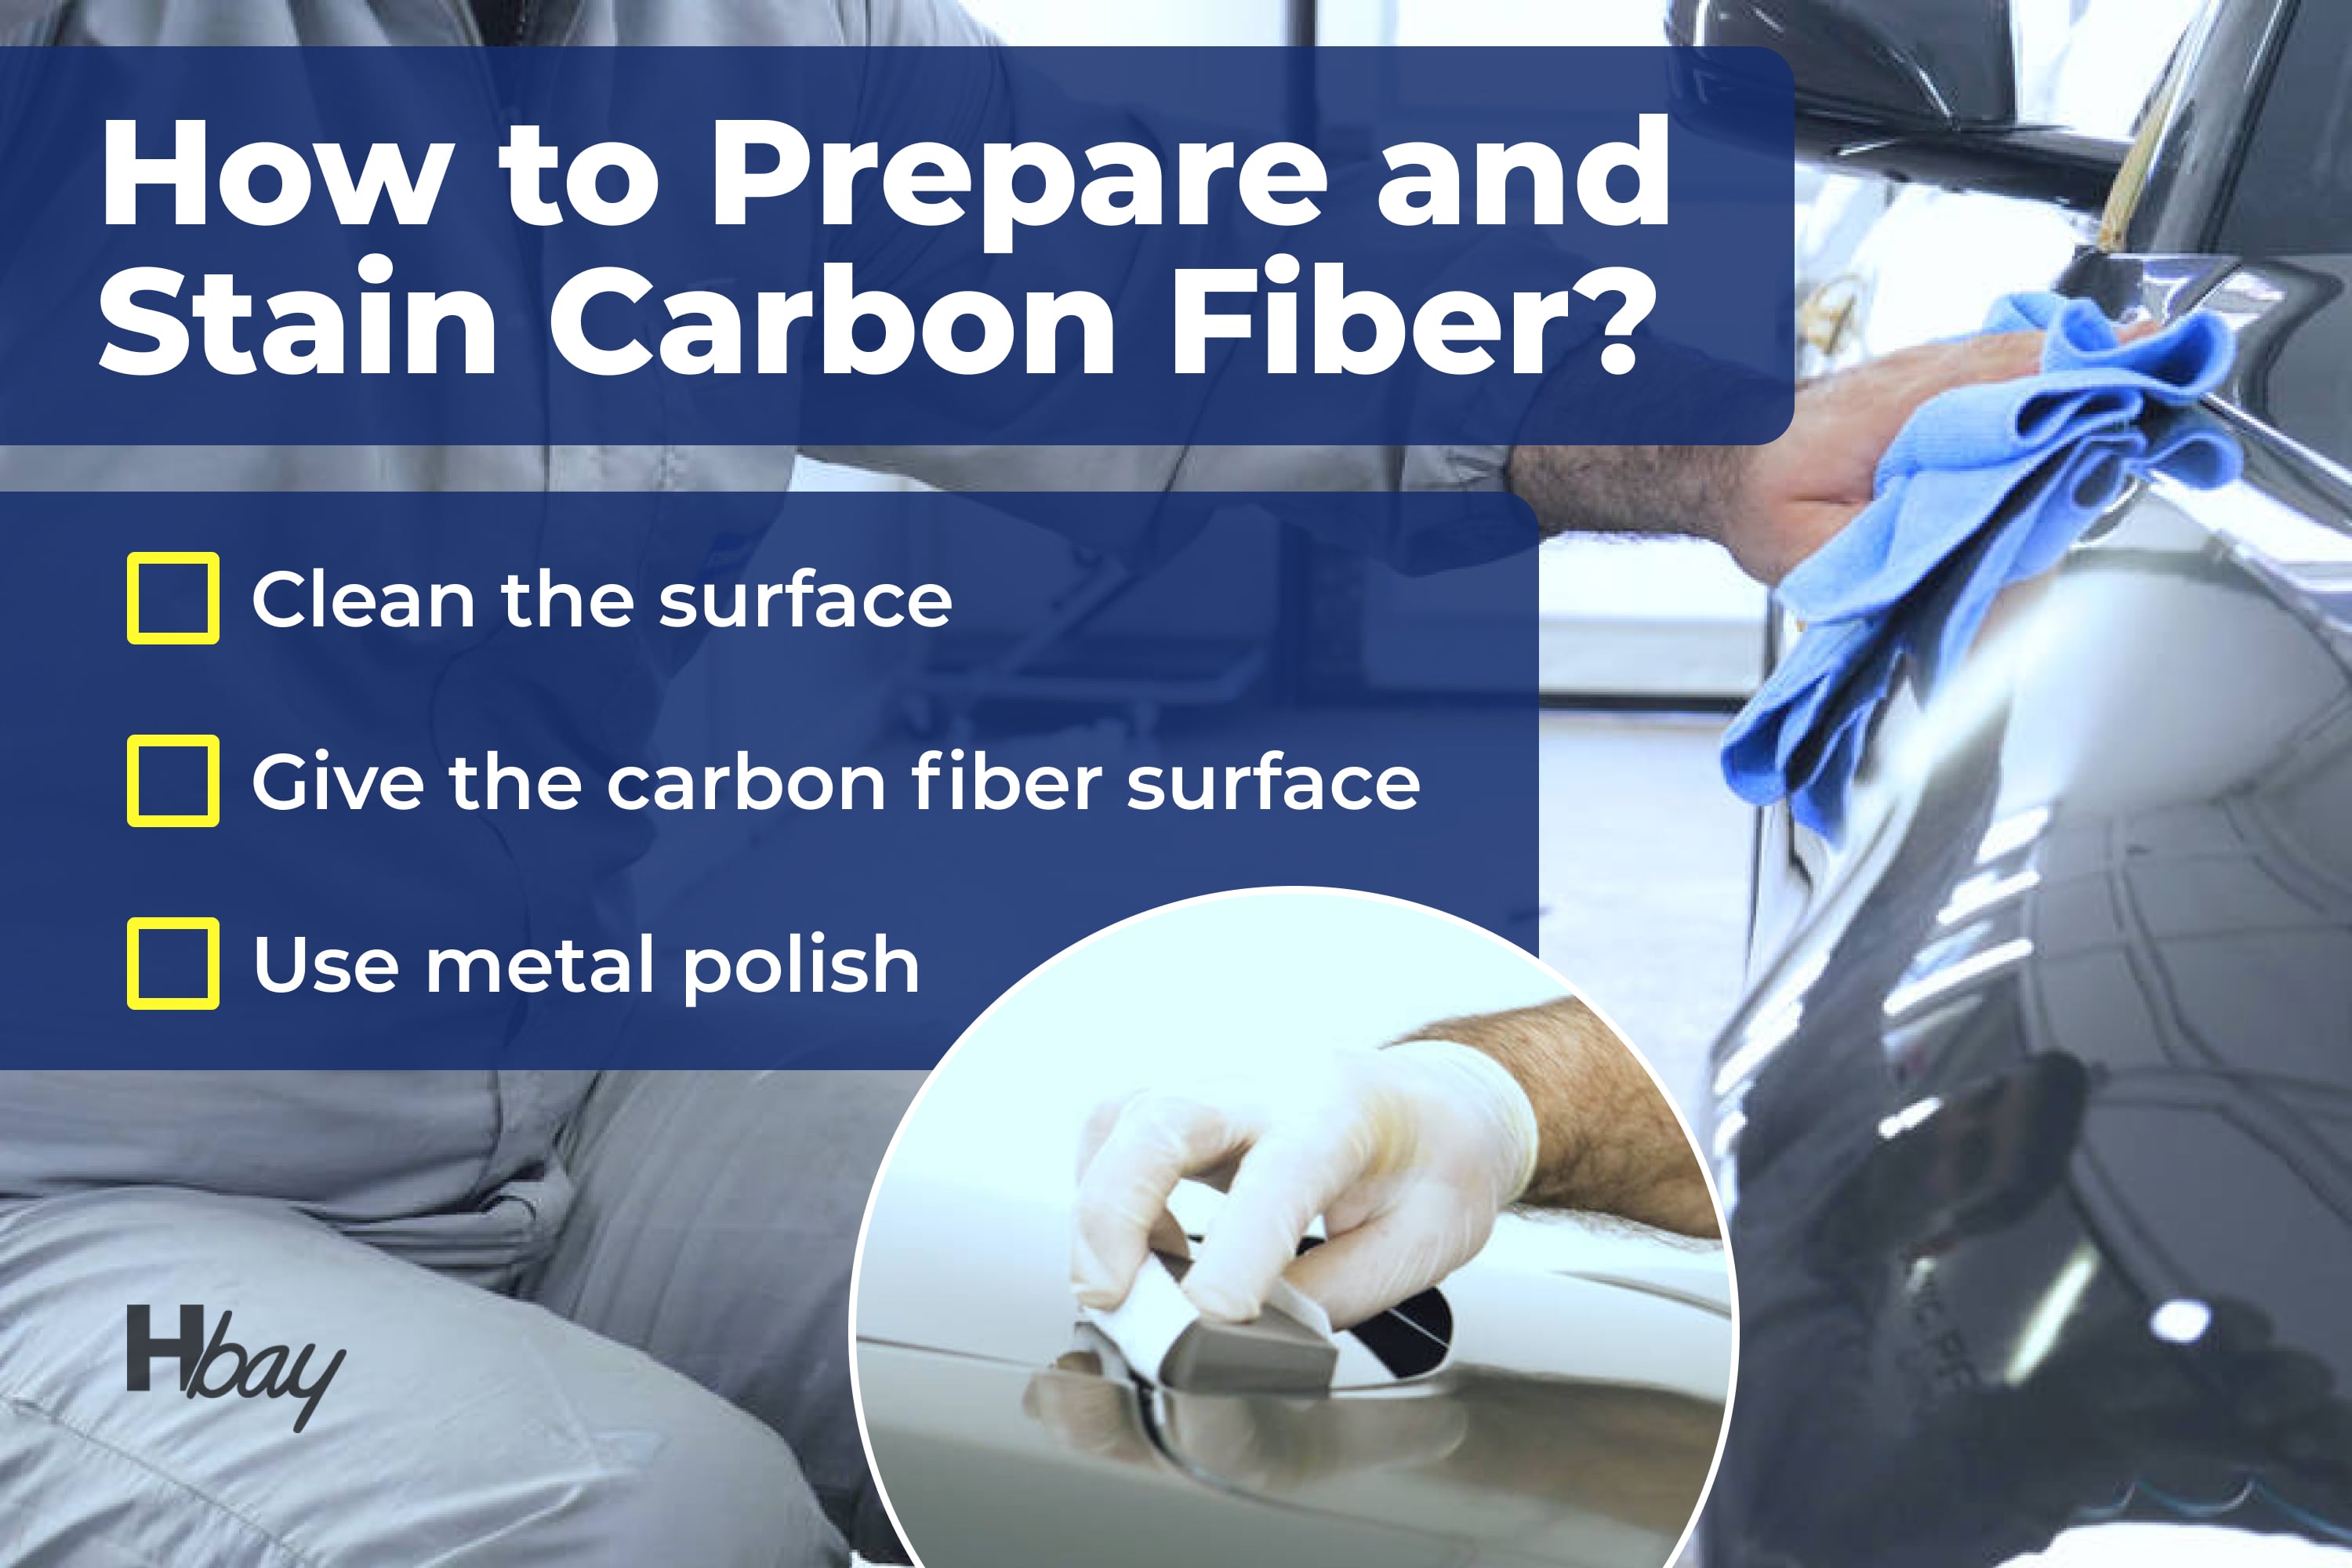 How to prepare and stain carbon fiber